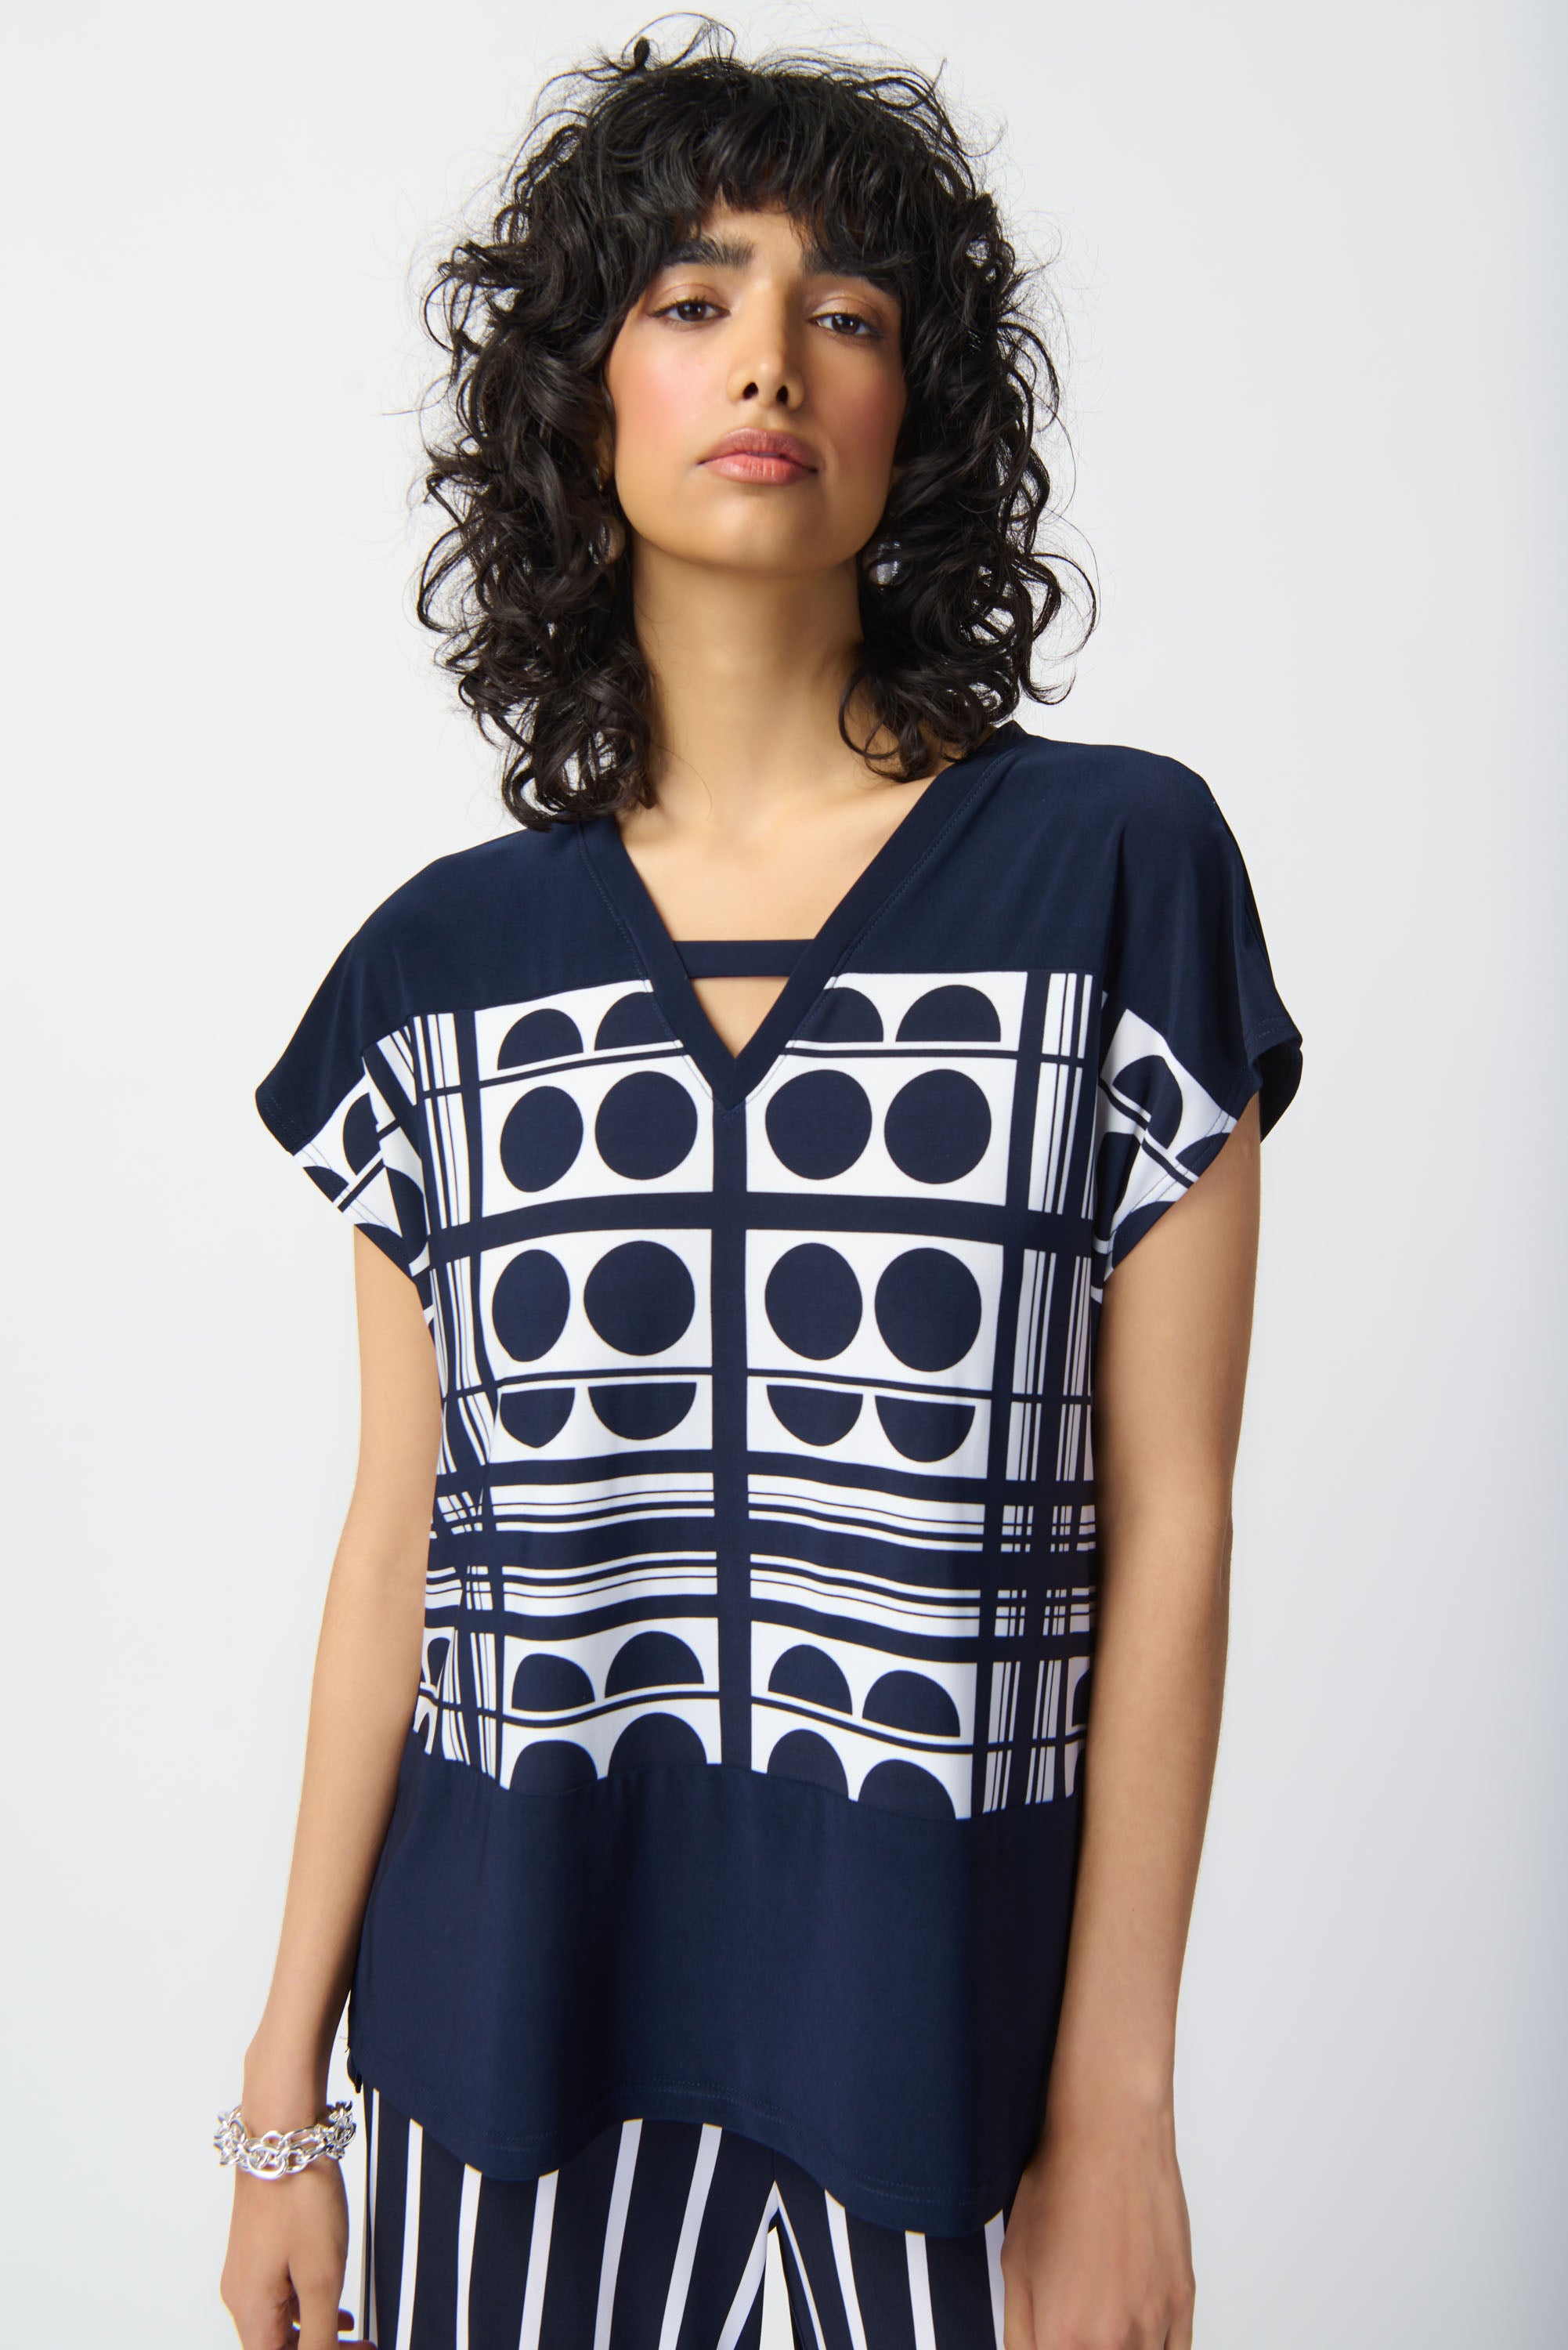 Elevate your look effortlessly with this lovely geometric printed top. The short raglan sleeves and V-shaped neckline lend a relaxed fit for everyday wear and give character to this contemporary piece. The side seam slits at the sweep add a subtle chic detail that also allows for easy movement.